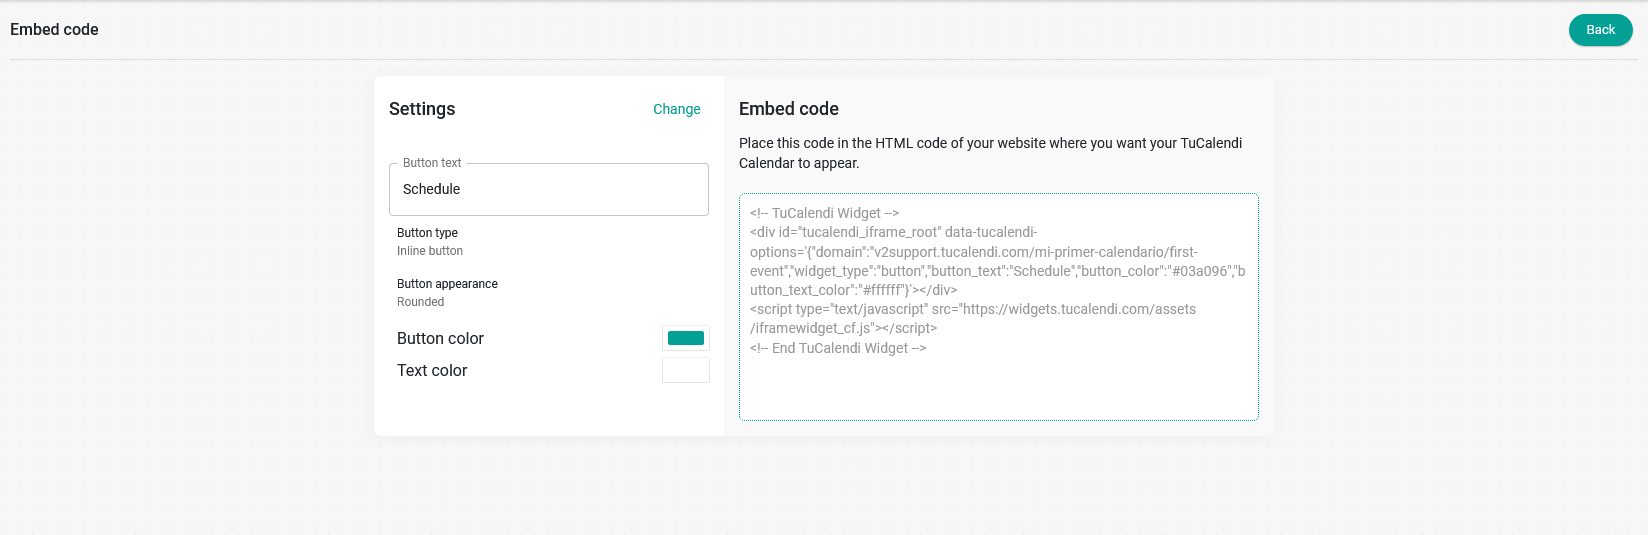 Embed button code